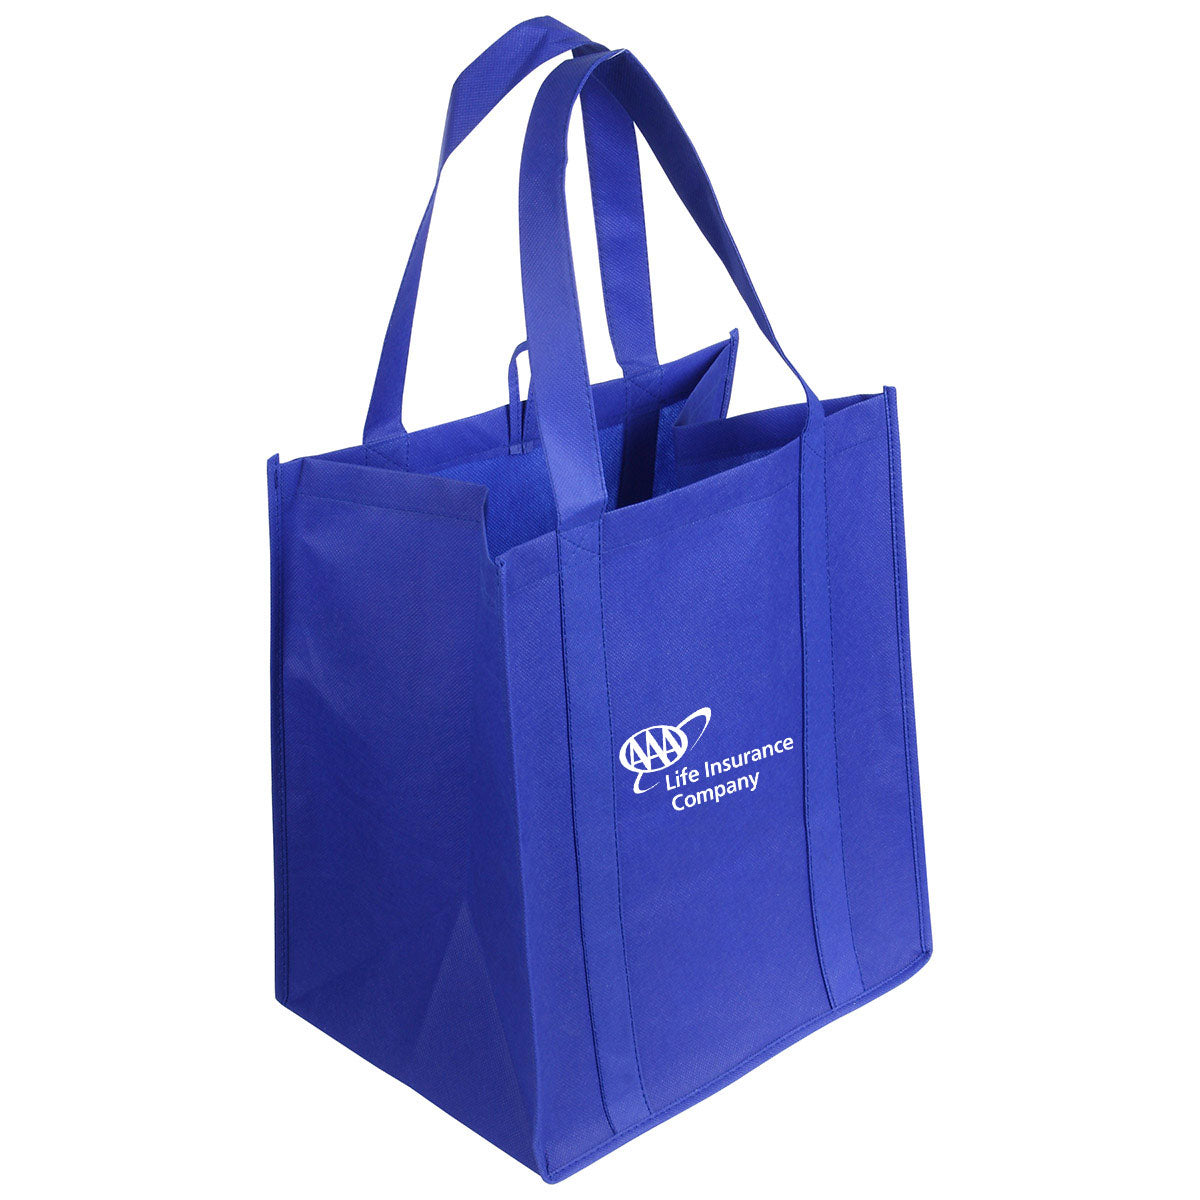 Reusable grocery tote